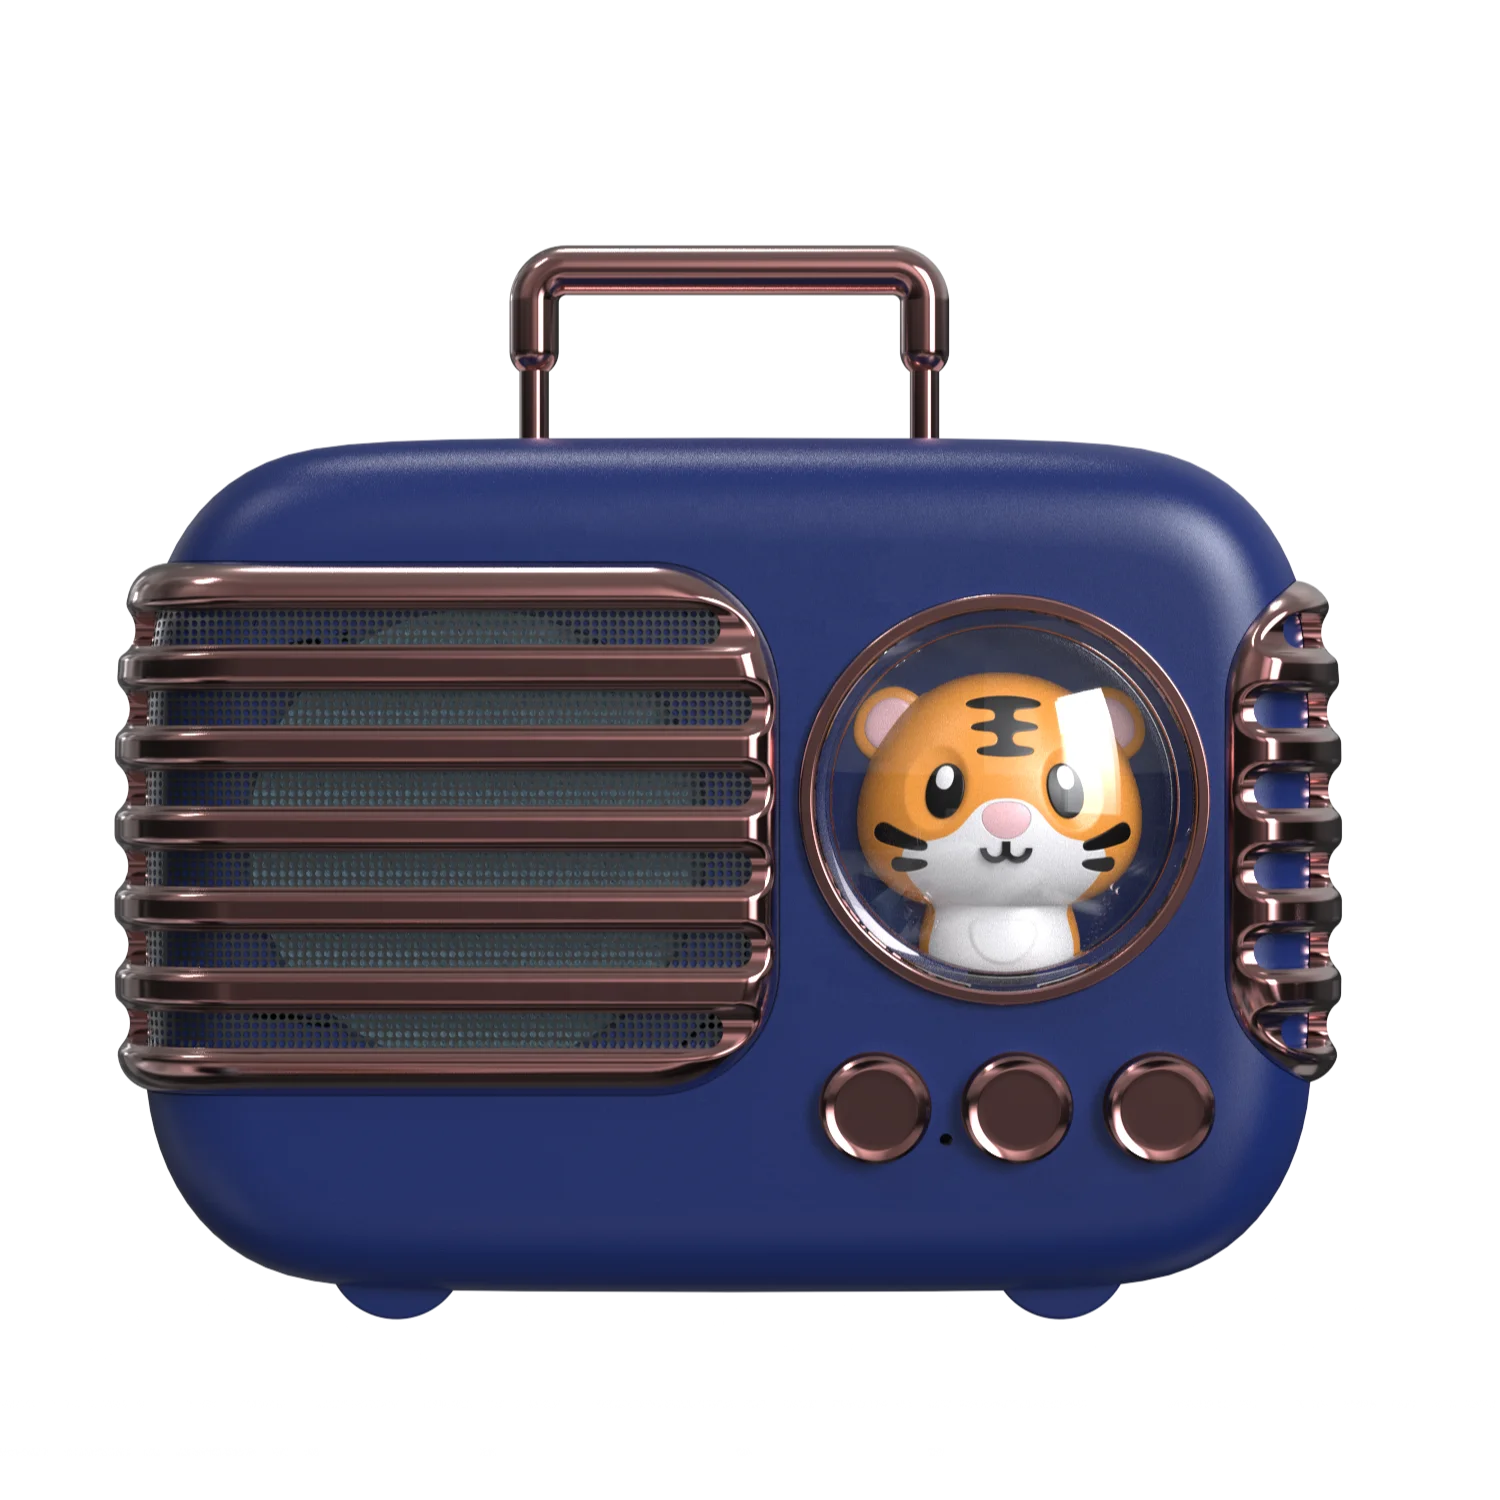 Dw09 Cartoon Speaker For Children Retro Style Suitcase Sound Box Retro  Boombox With Cute Teddy Bear Birthday Gifts For Girls - Buy Stereo  Speakers,Audiophile Speakers,Surround Sound Speaker Mini Parlante Product  on 